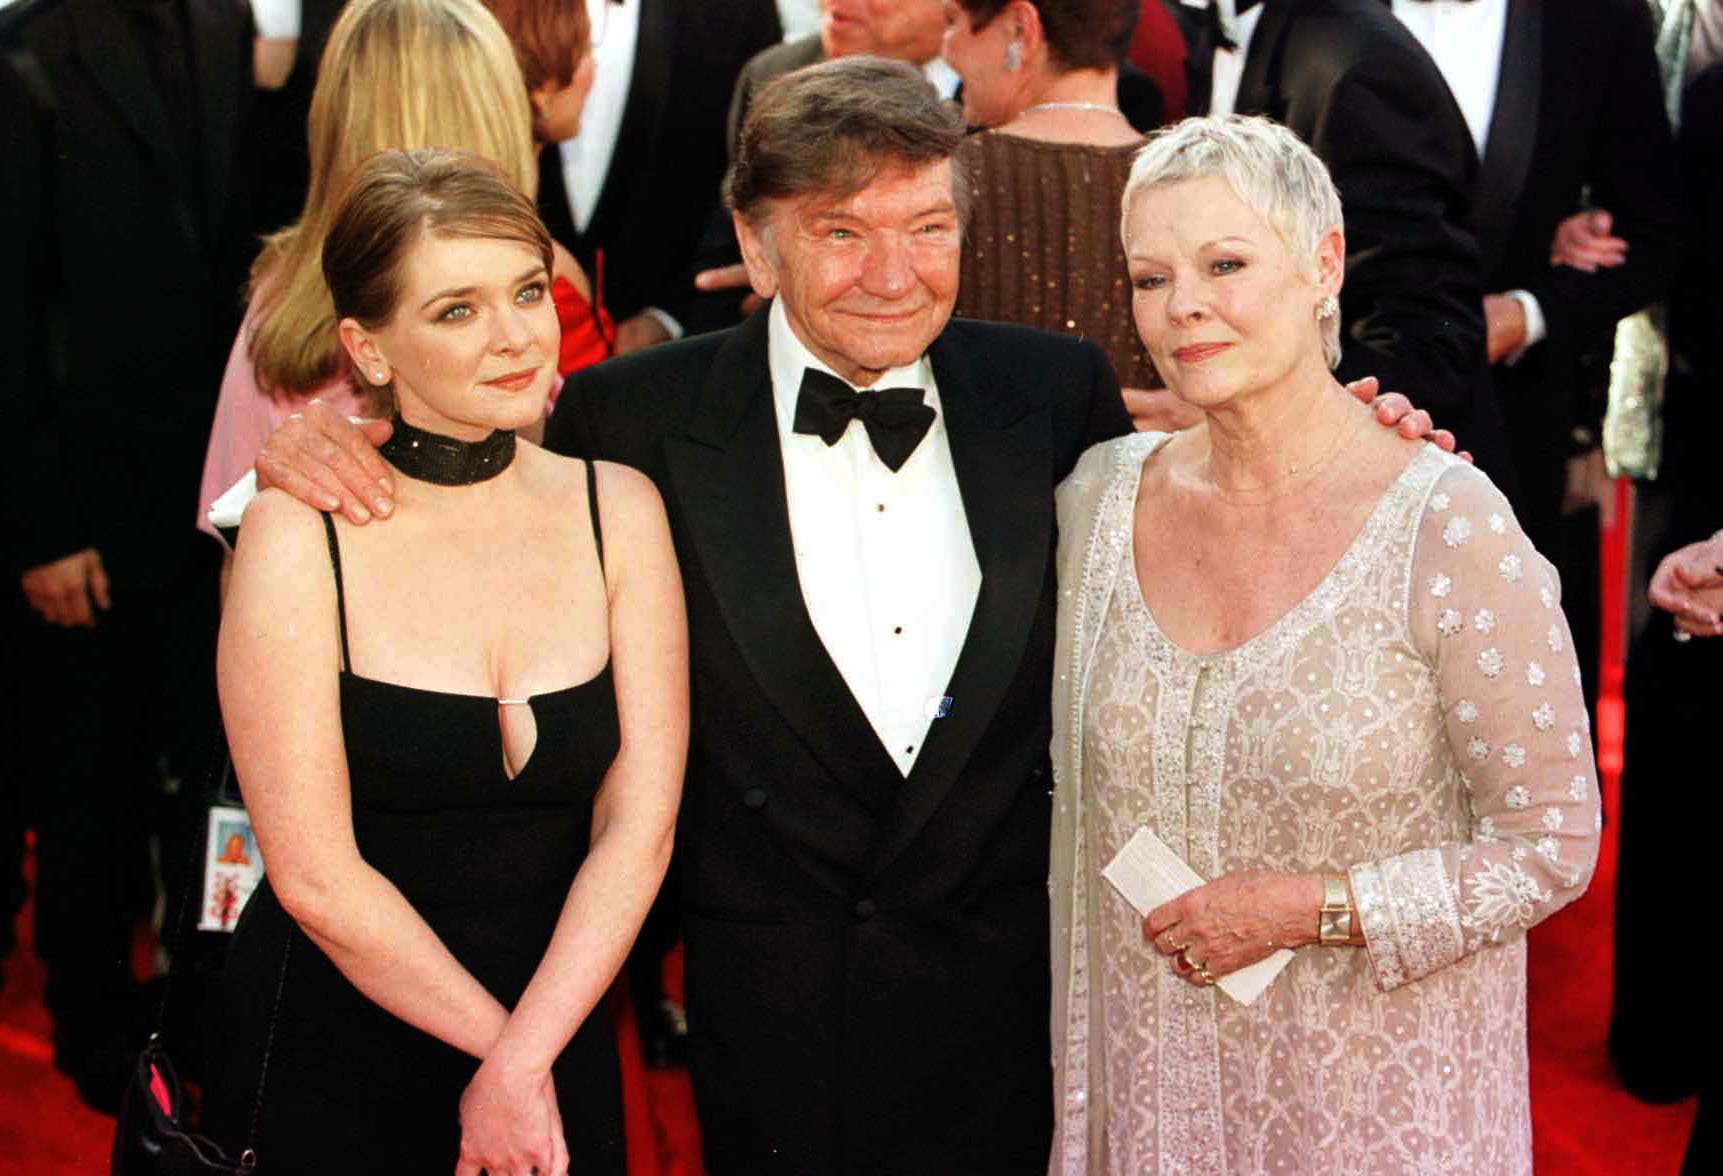 Dame Judi Dench with her husband, Michael Williams, and daughter Finty Williams, at the Shrine Auditorium in Los Angeles, USA. | Source: Getty Images